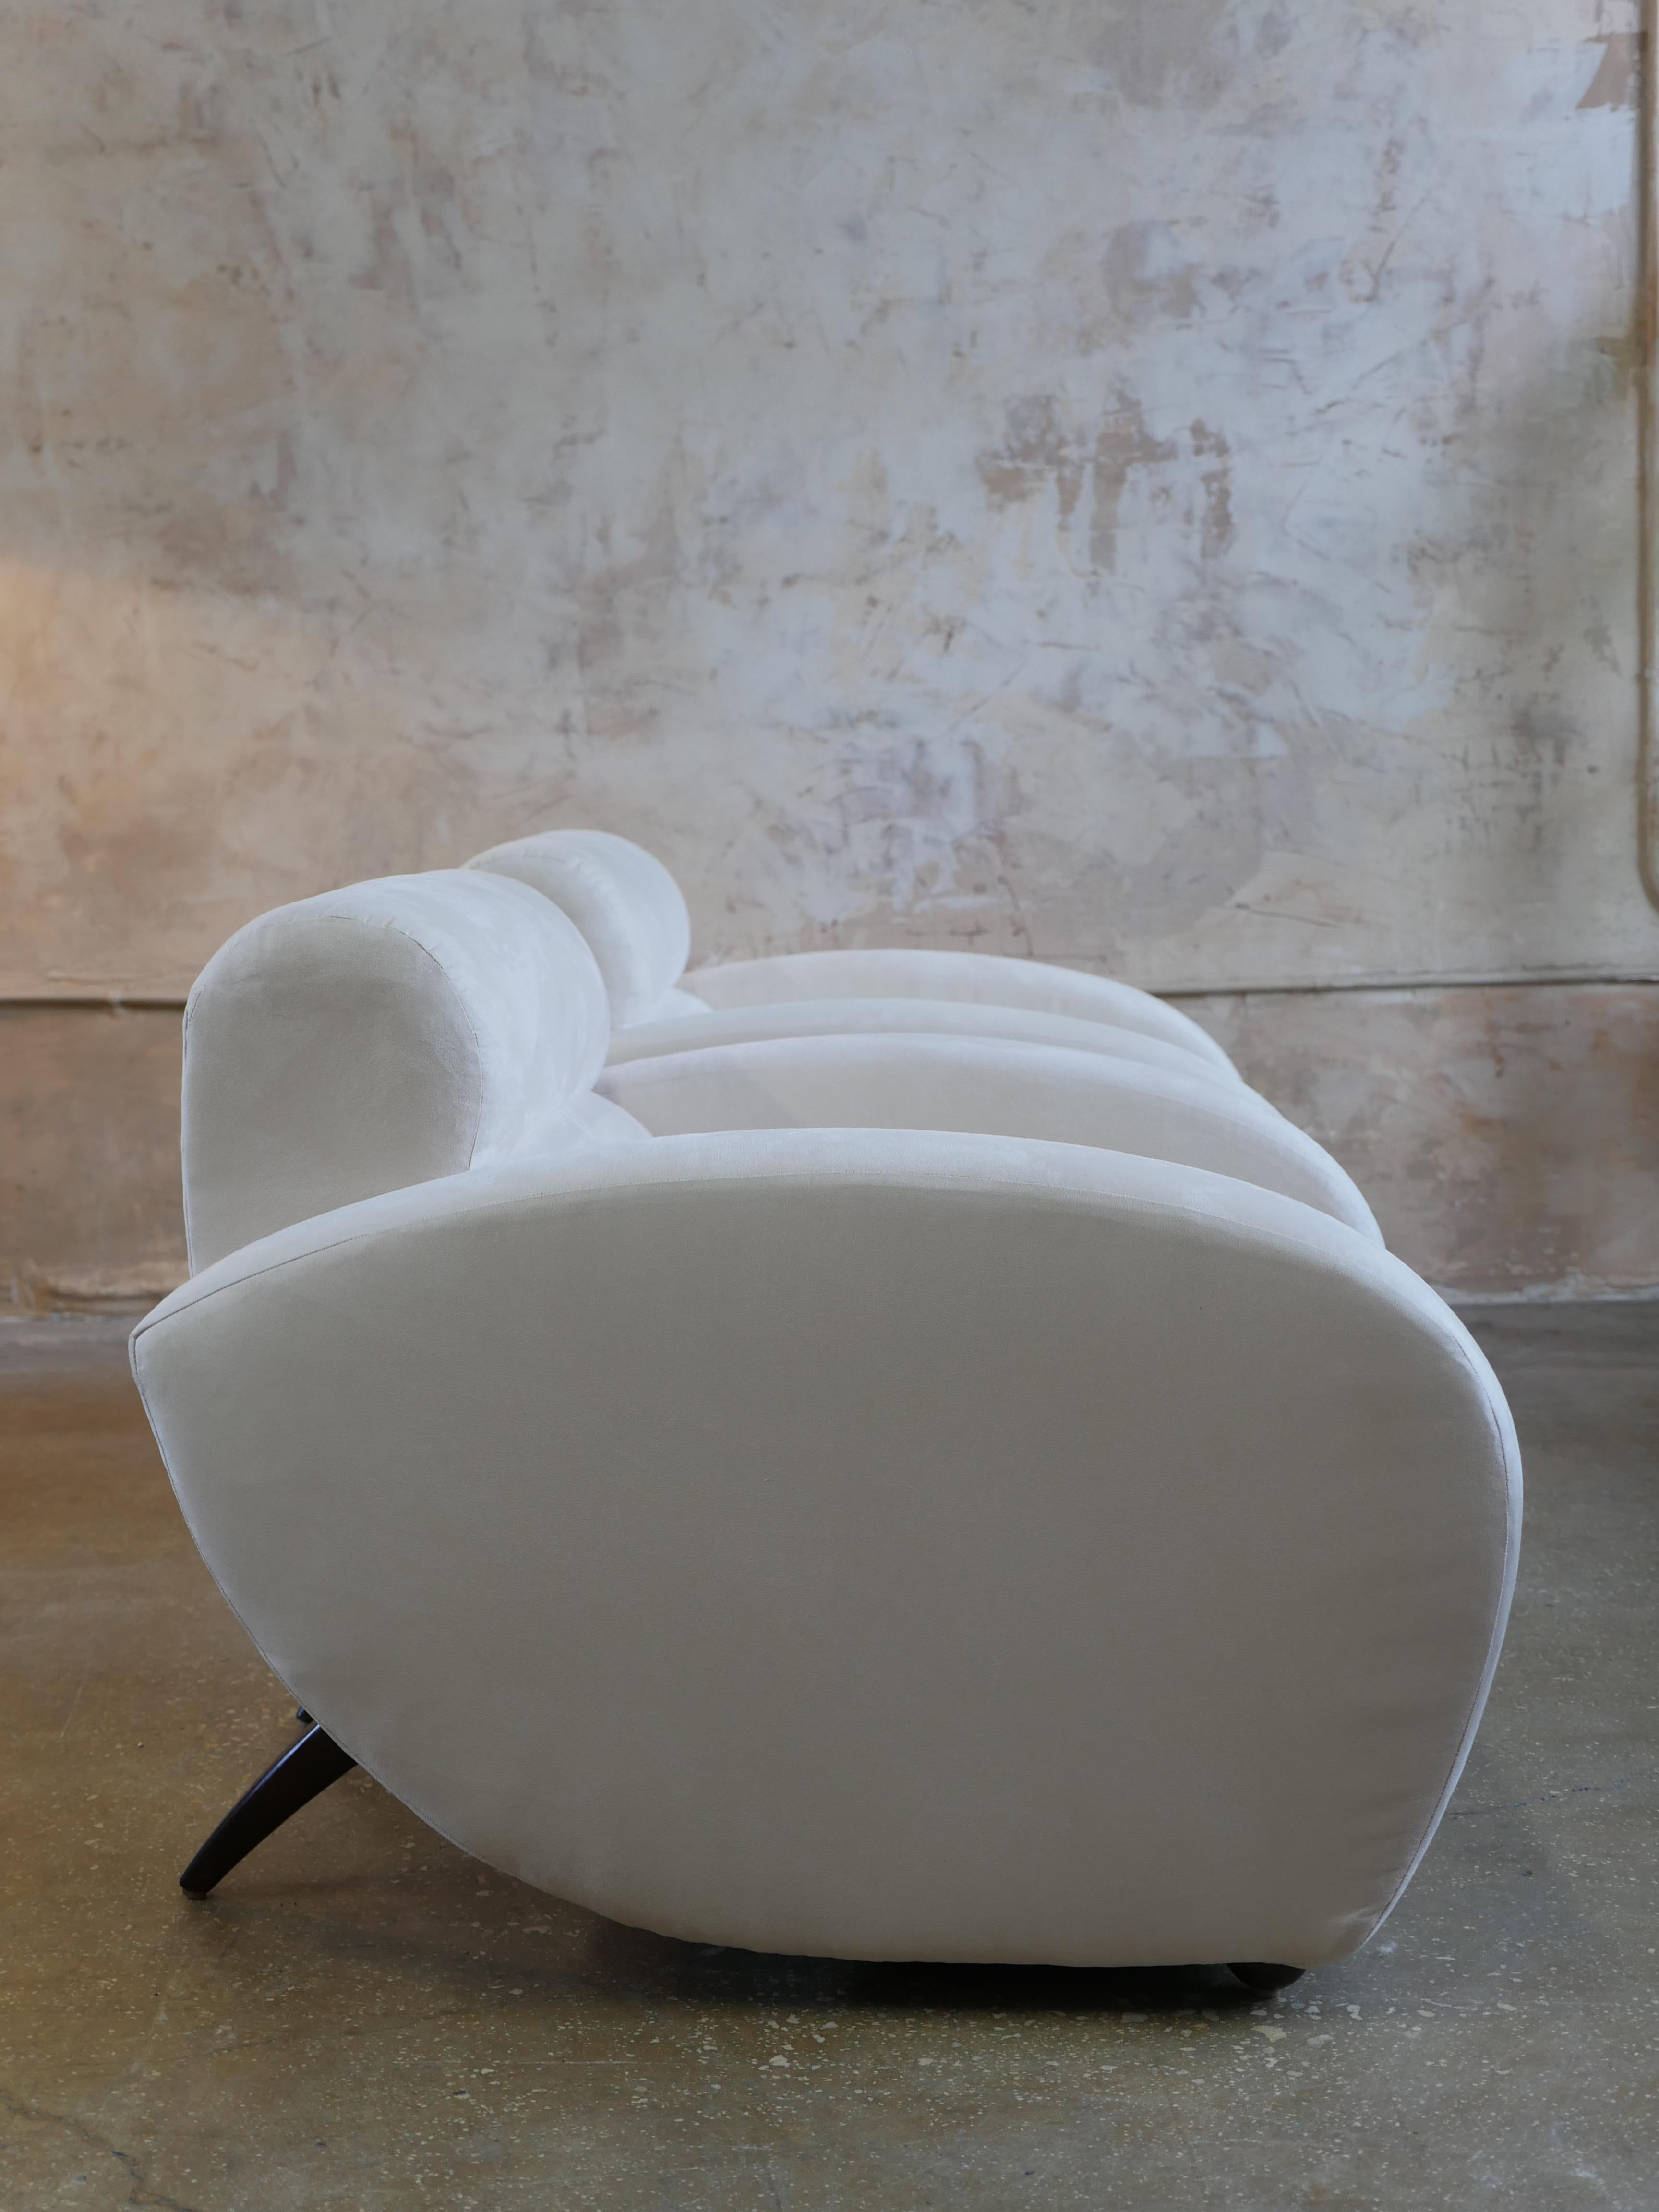 Pair of Weiman/Preview Furniture lounge chairs with their original ivory utrasuede fabric and rich mahogany wood legs. The lounge chairs have a sleek and graceful design reminiscent of Vladimir Kagan that is sure to add a touch of cool and elegance